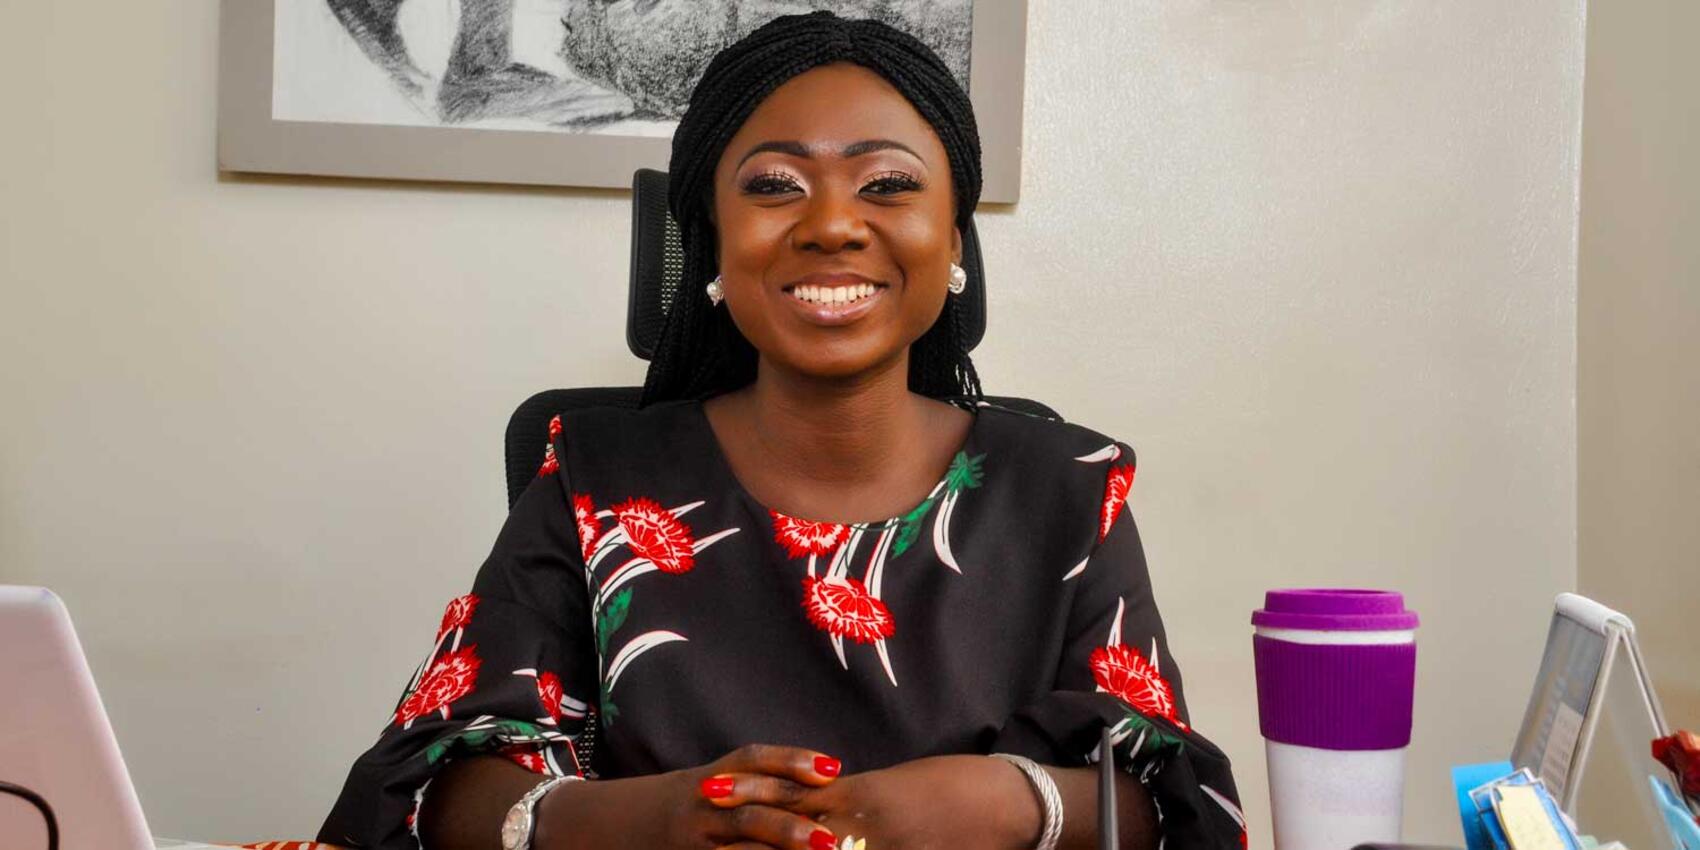 Oluwaseun Sangoleye is CEO of Baby Grubz, a Nigerian social enterprise that she founded when her son's health waned after he refused traditional baby foods and formulas.